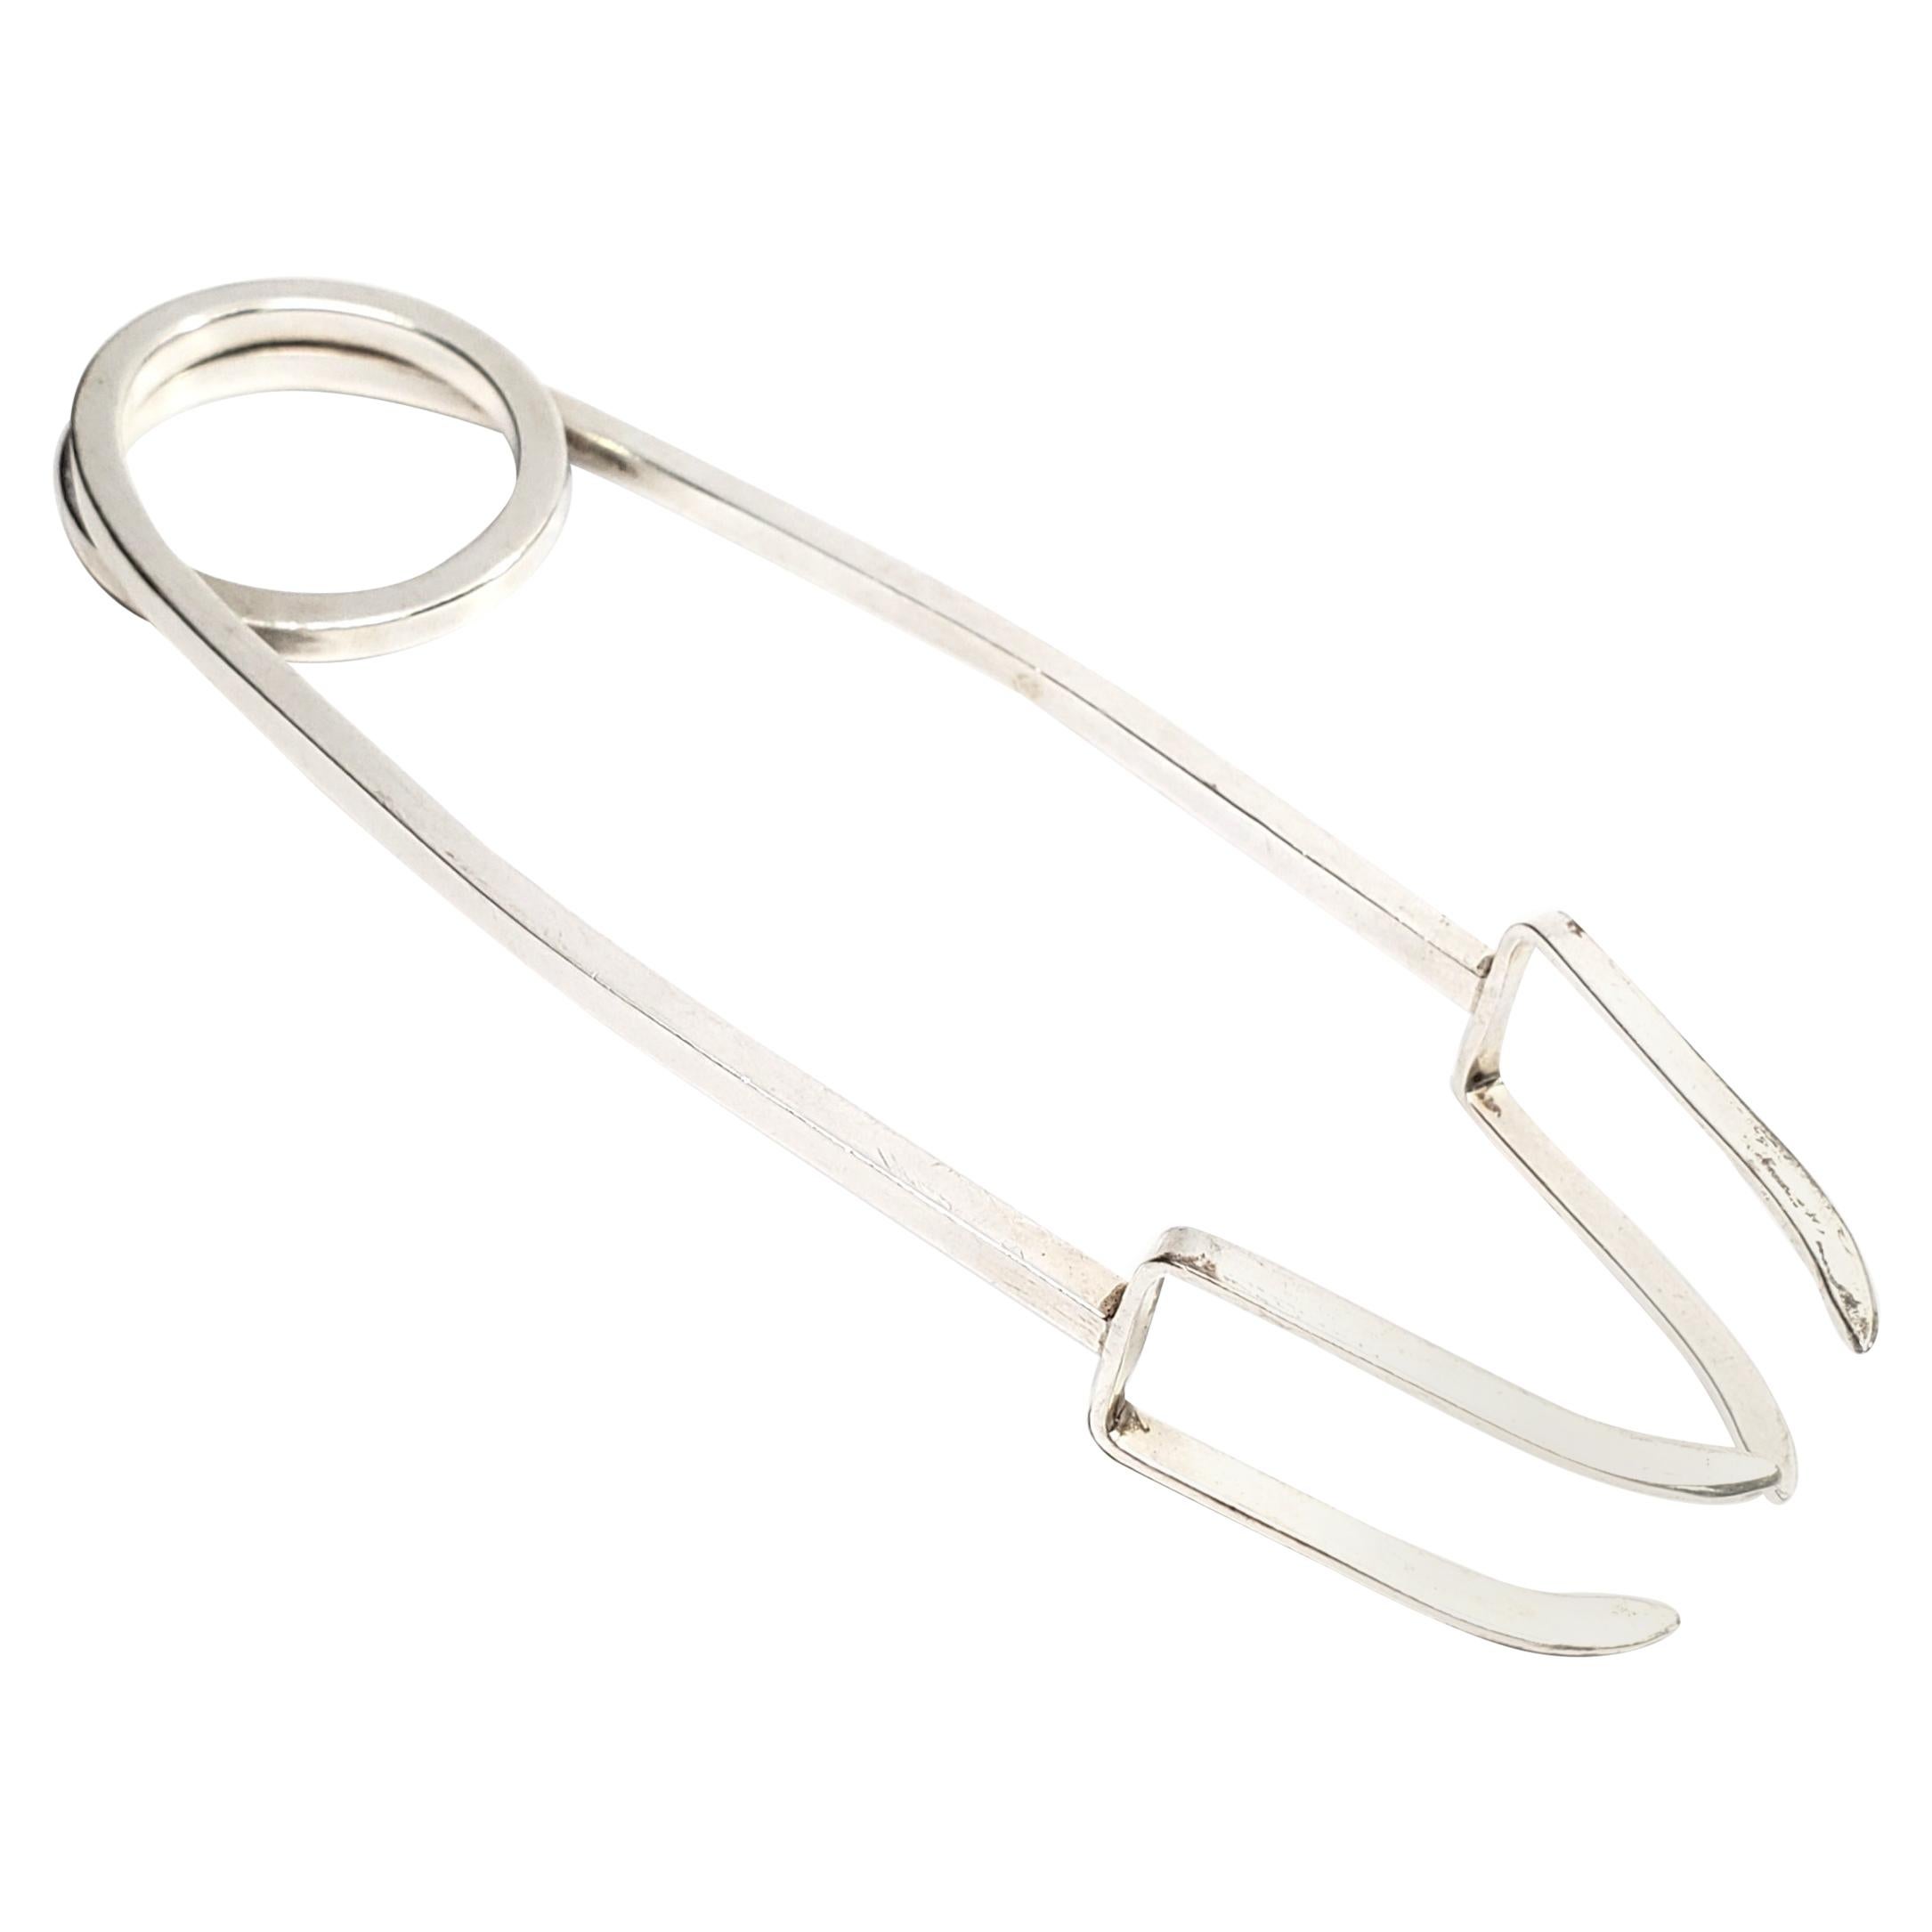 Leonore Doskow for Tiffany & Co. Sterling Silver Ice Tongs